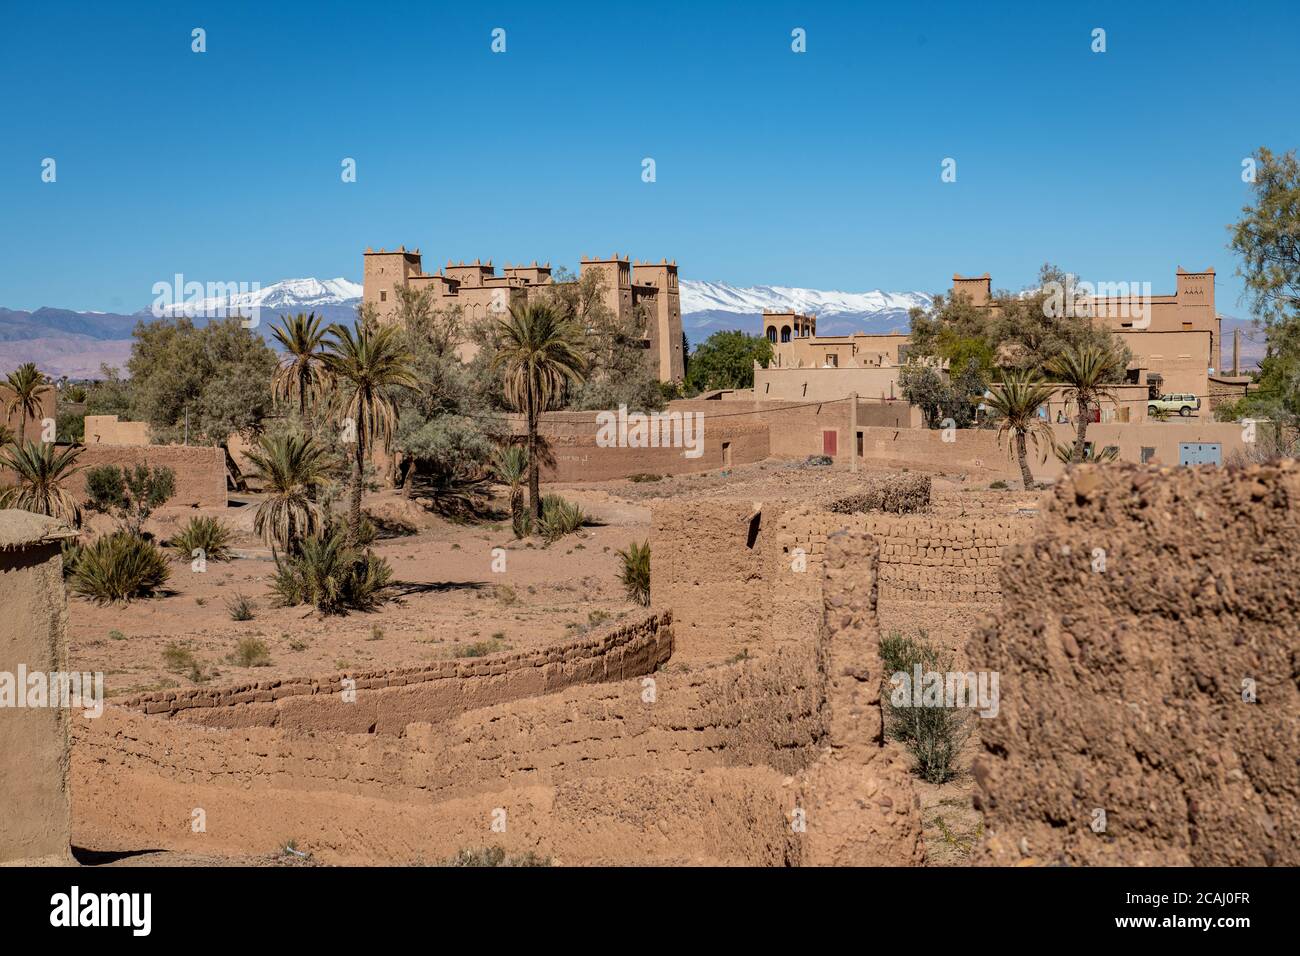 Valley of the Thousand Kasbahs in Morocco Stock Photo - Alamy